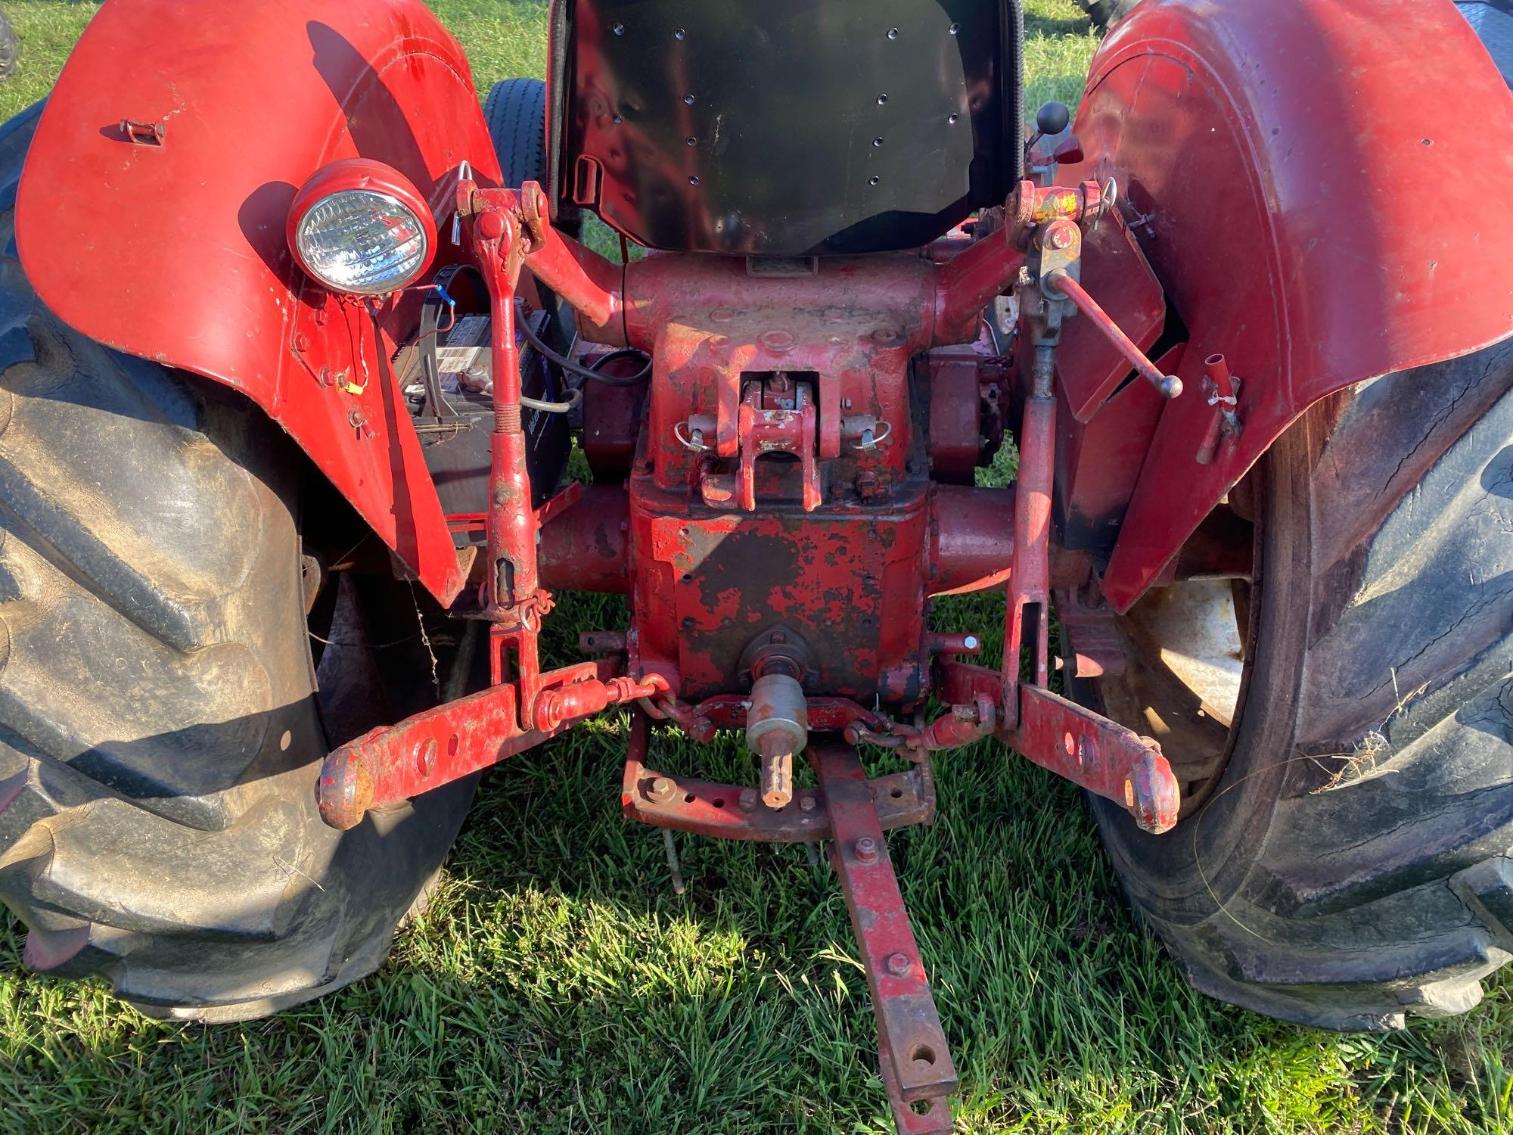 Image for International 424 Tractor, Does Not Have Power Steering